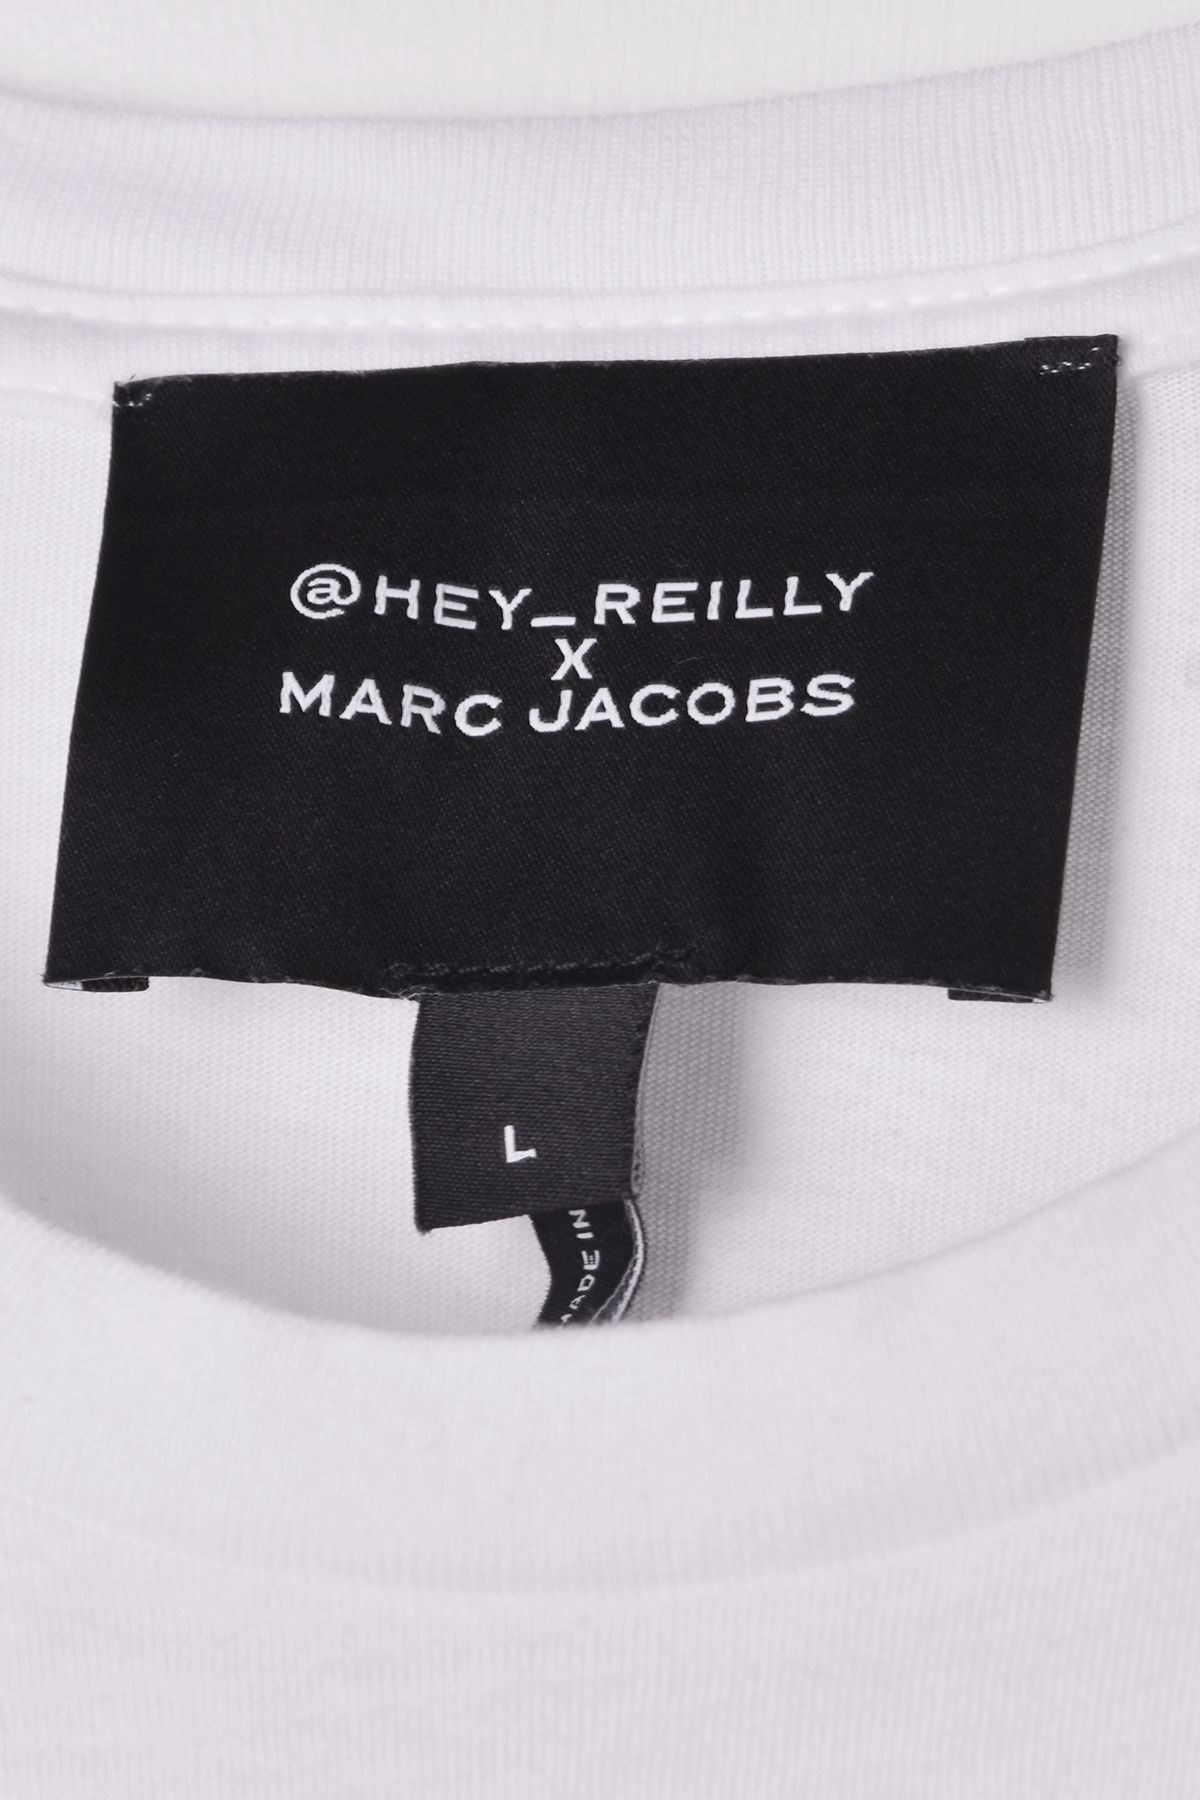 MARC JACOBS x HEY REILLY コラボ